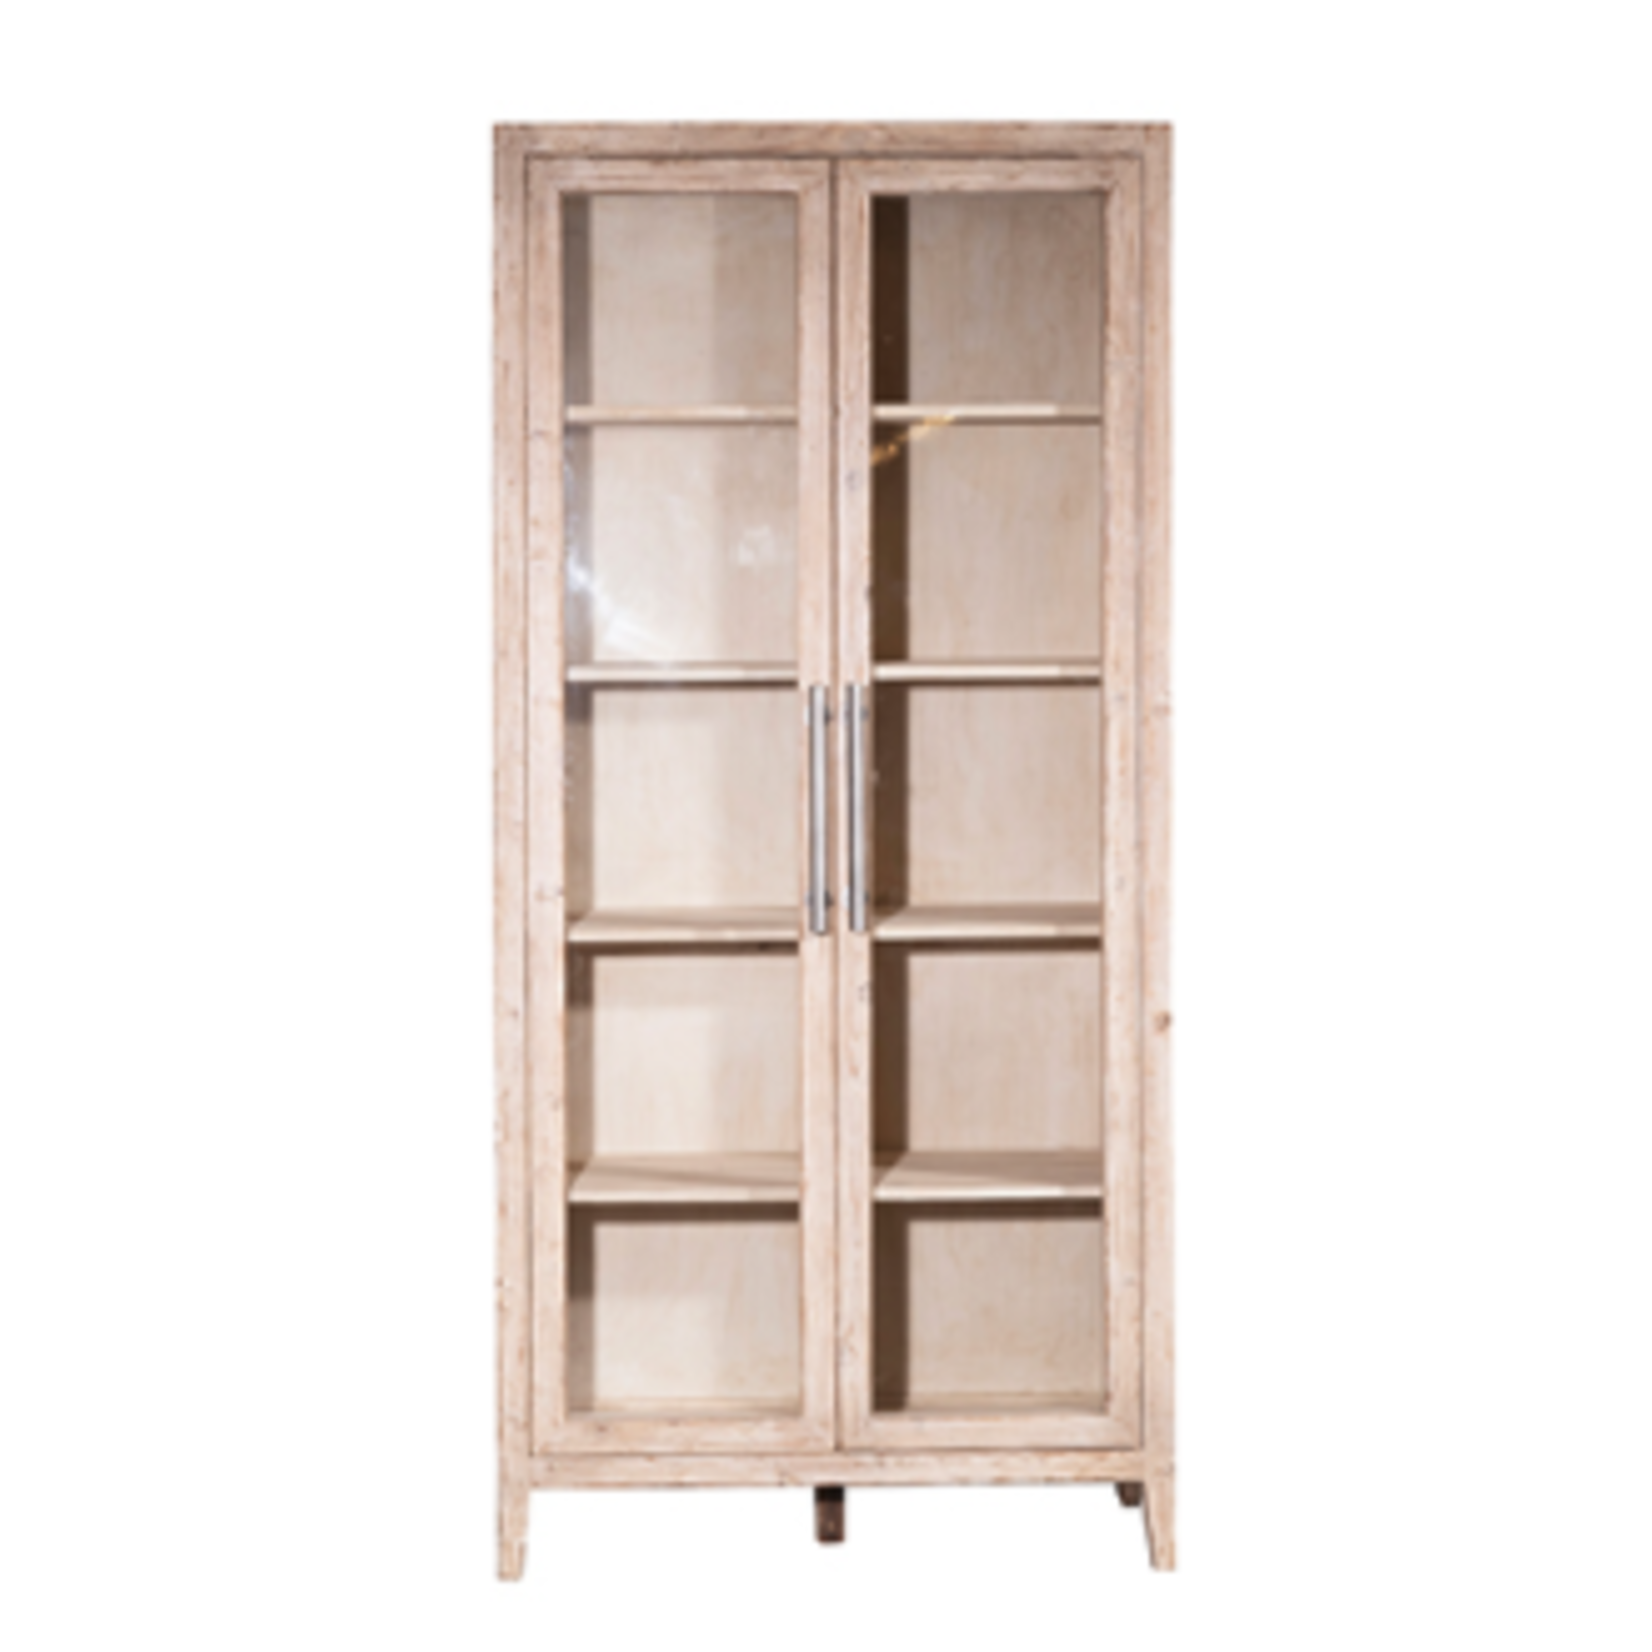 Outside The Box 93x18x43  Basel Reclaimed Pine Wood & Glass Door Cabinet